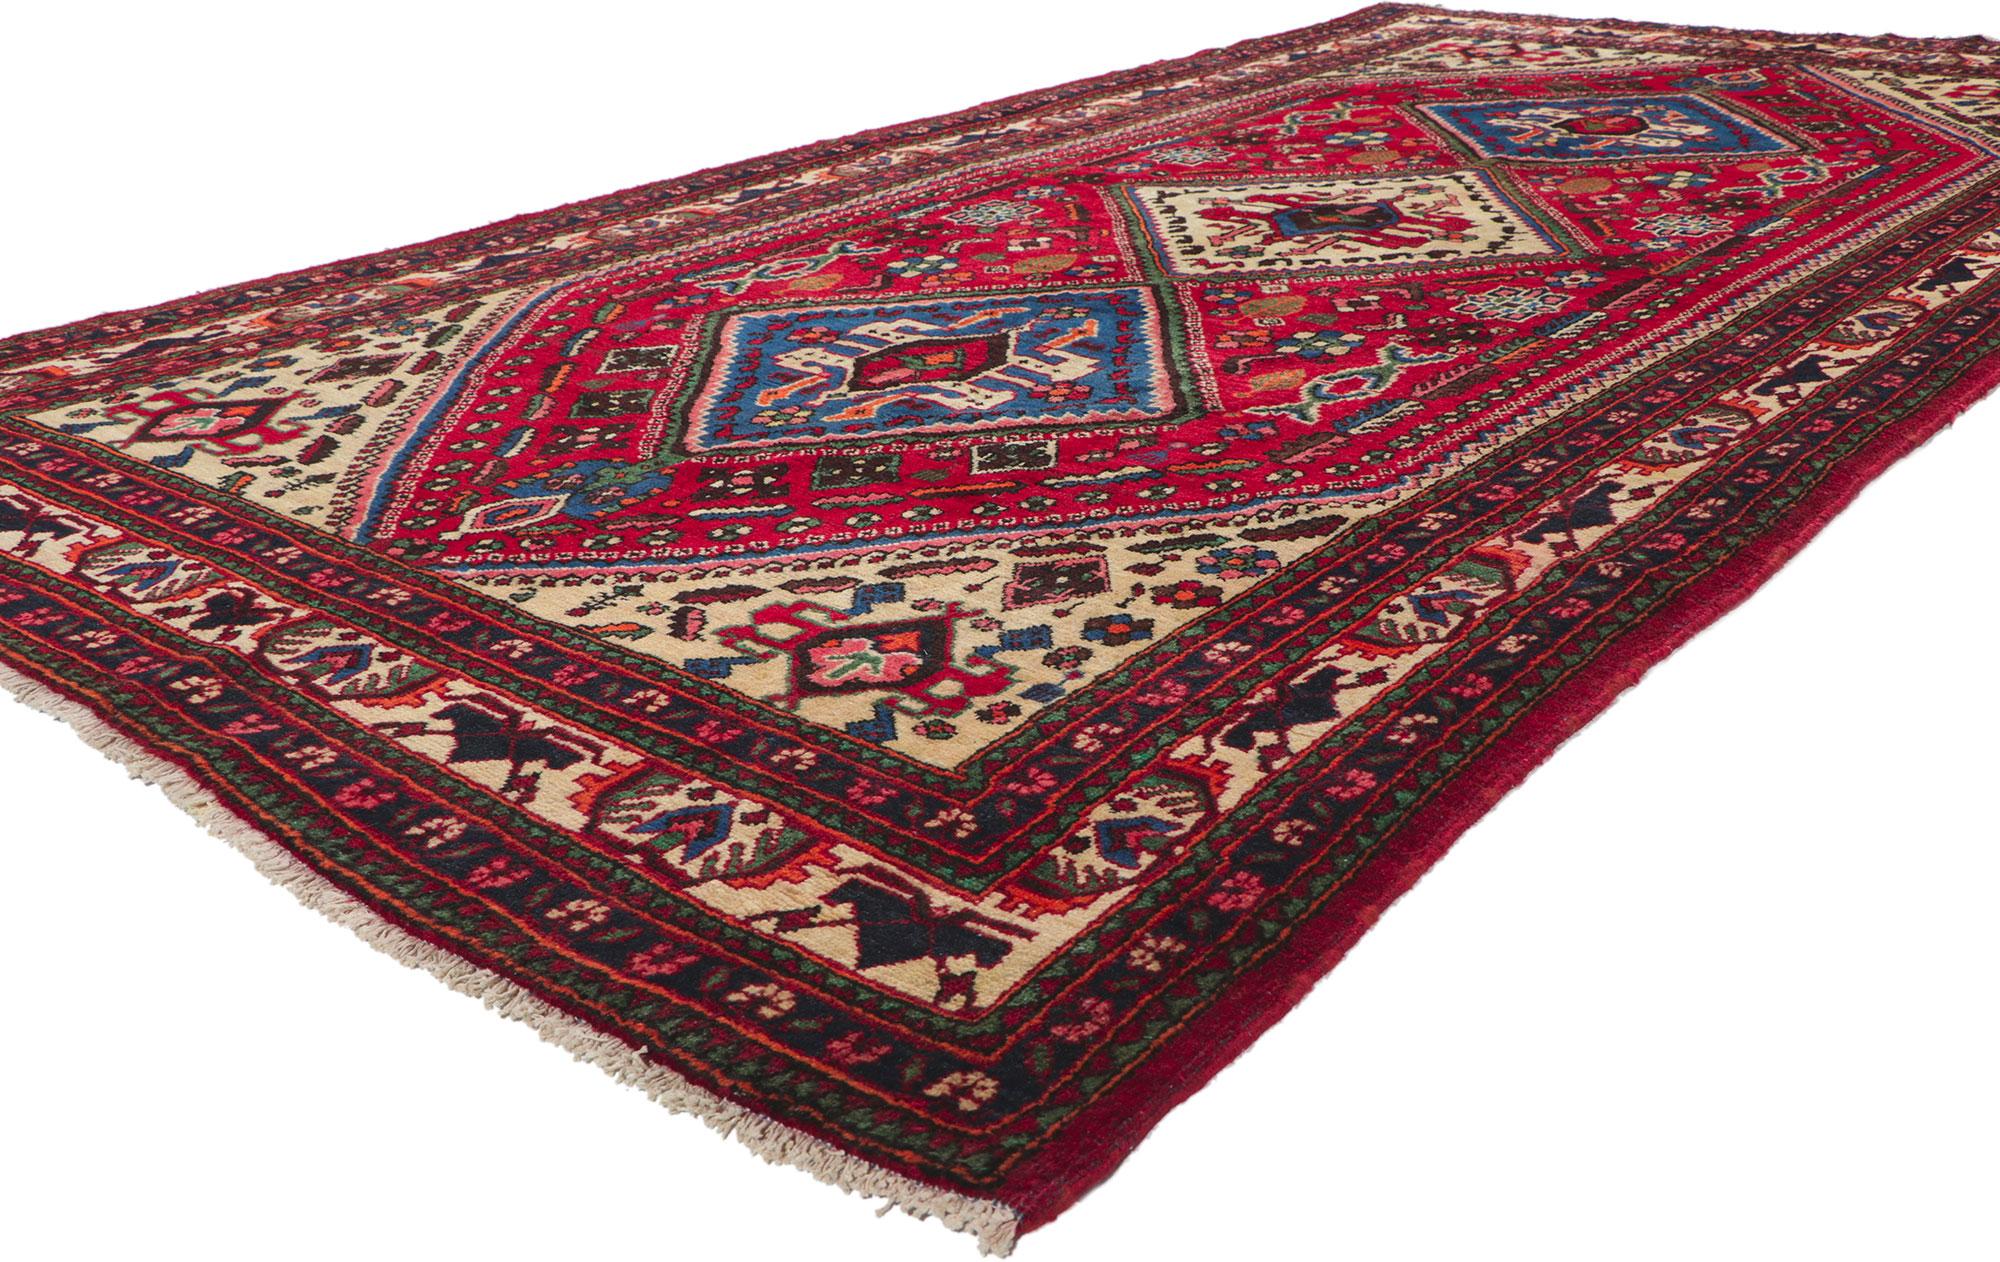 61035 Vintage Persian Shiraz Rug, 05'03 x 10'00. With its nomadic charm, incredible detail and texture, this hand knotted wool vintage Persian Shiraz rug is a captivating vision of woven beauty. The geometric design and lively colorway woven into